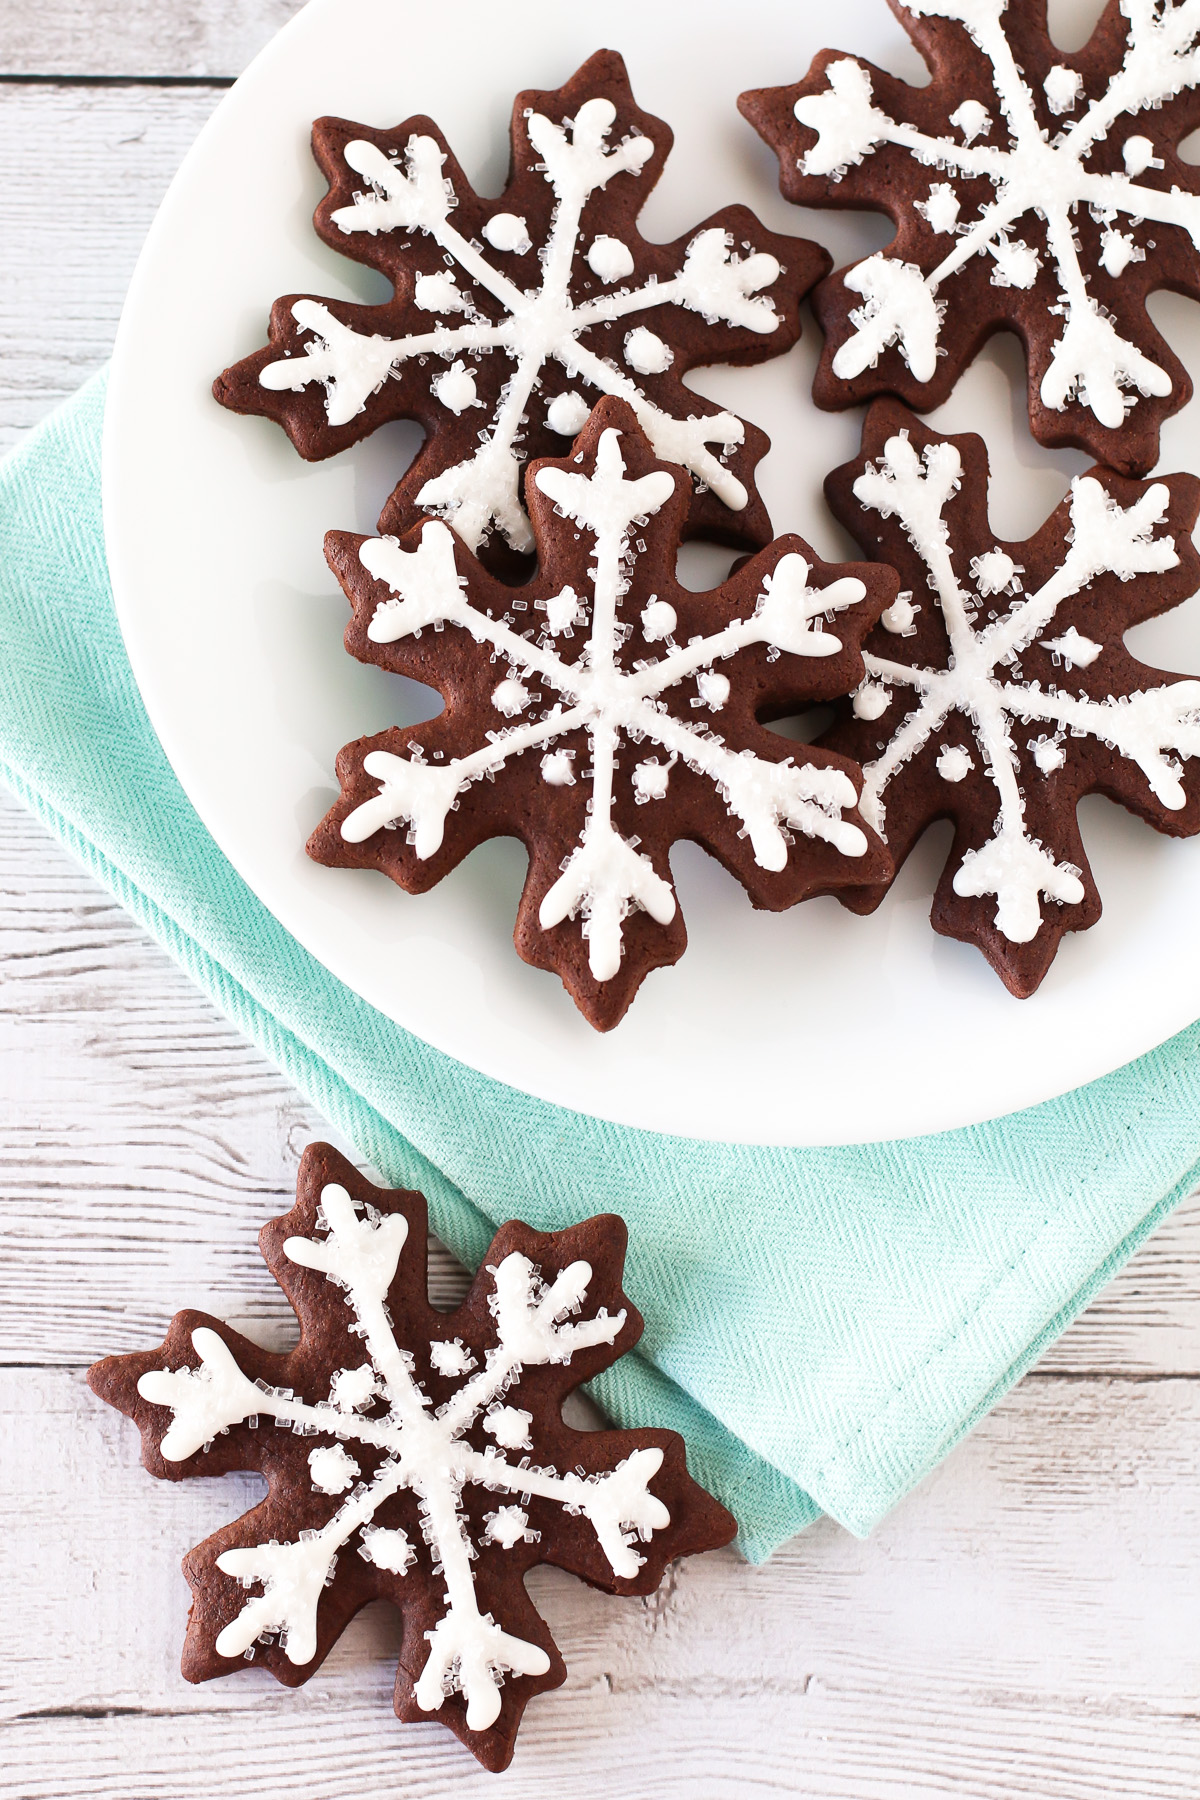 Gluten Free Vegan Chocolate Snowflake Sugar Cookies. Beautiful chocolate snowflakes, with a simple glaze and sparkling sugar. Oh so festive!